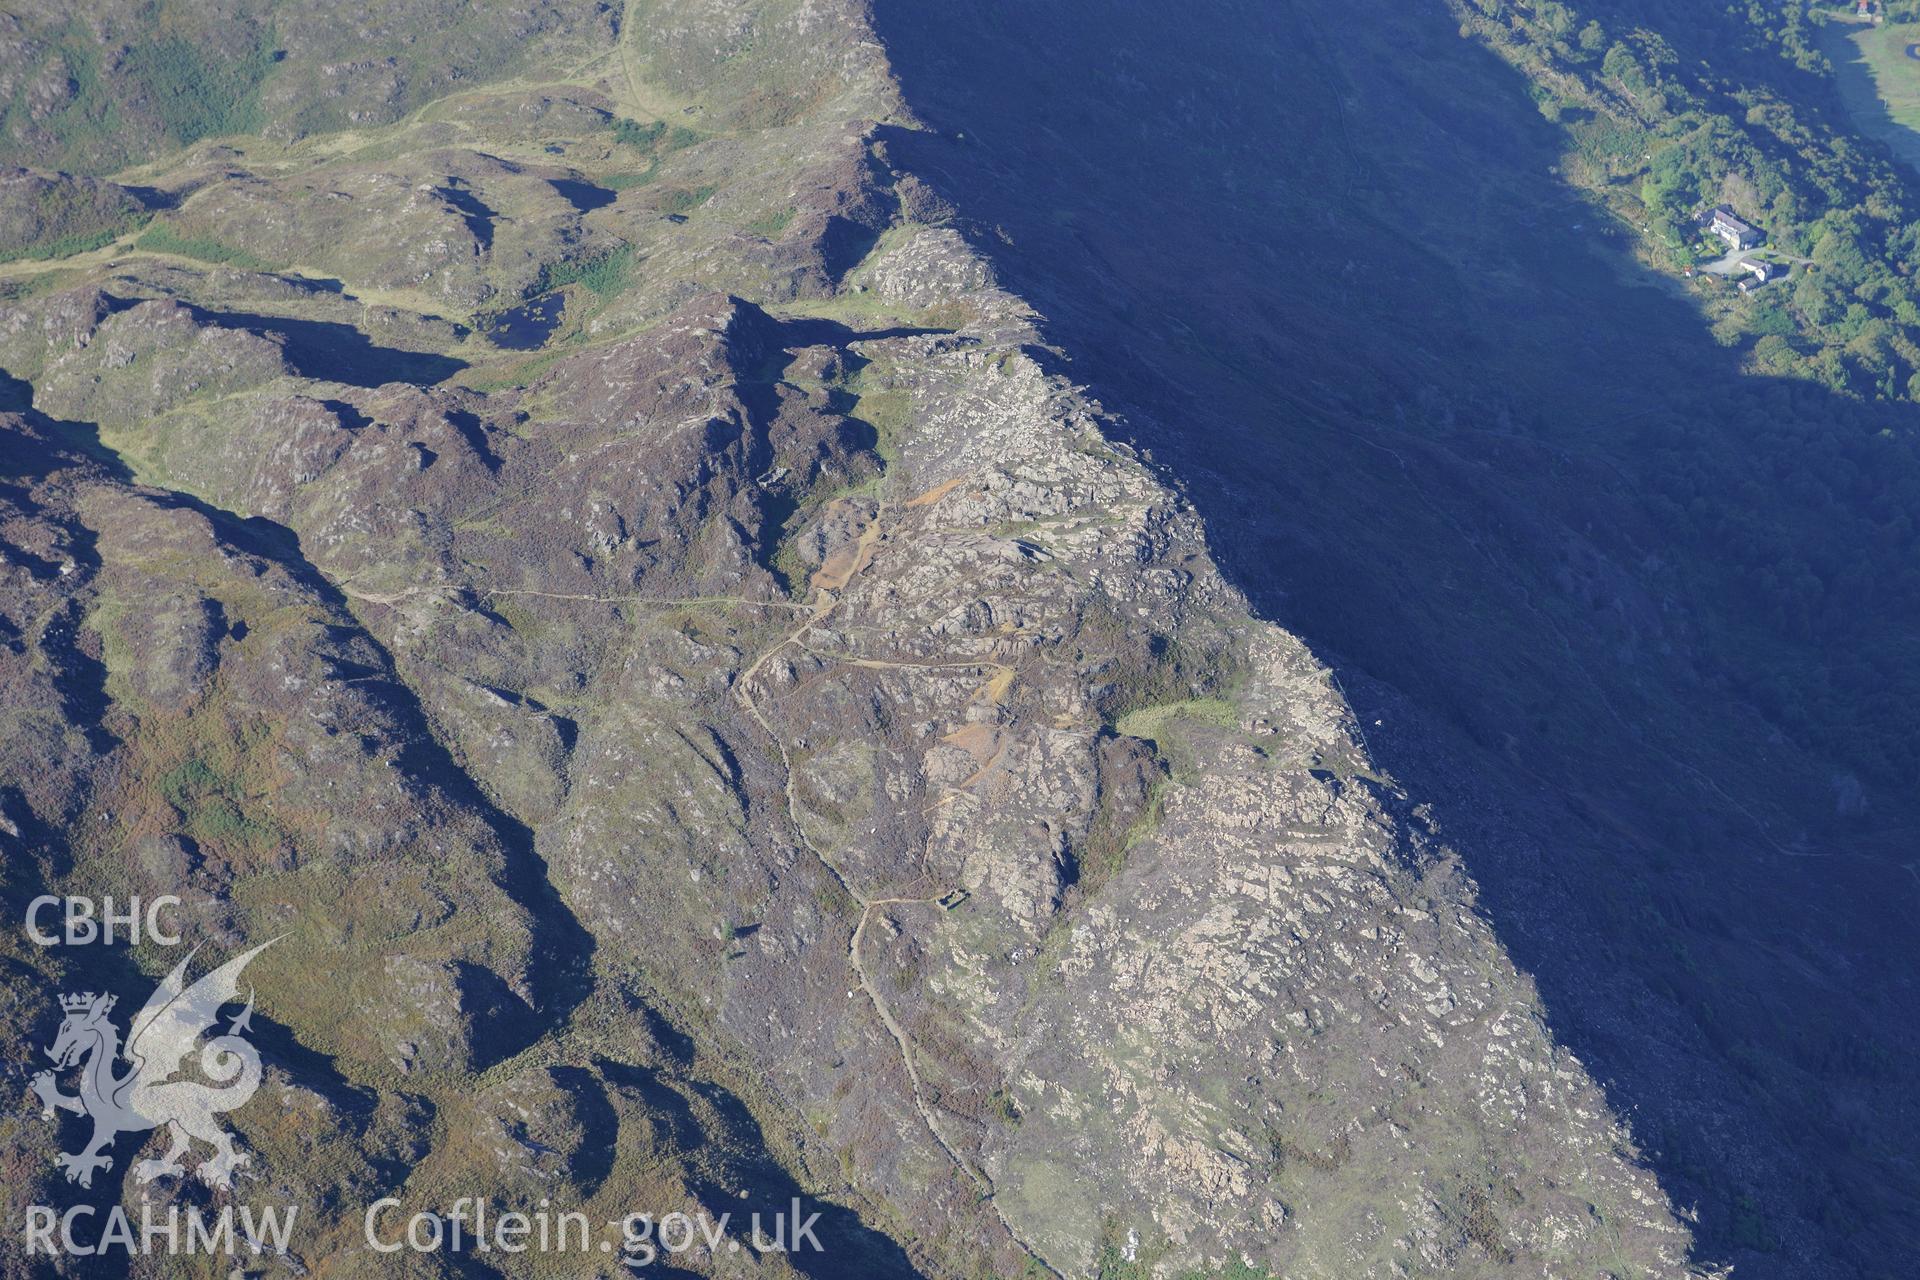 Llwyndu copper mine, west of Beddgelert. Oblique aerial photograph taken during the Royal Commission's programme of archaeological aerial reconnaissance by Toby Driver on 2nd October 2015.